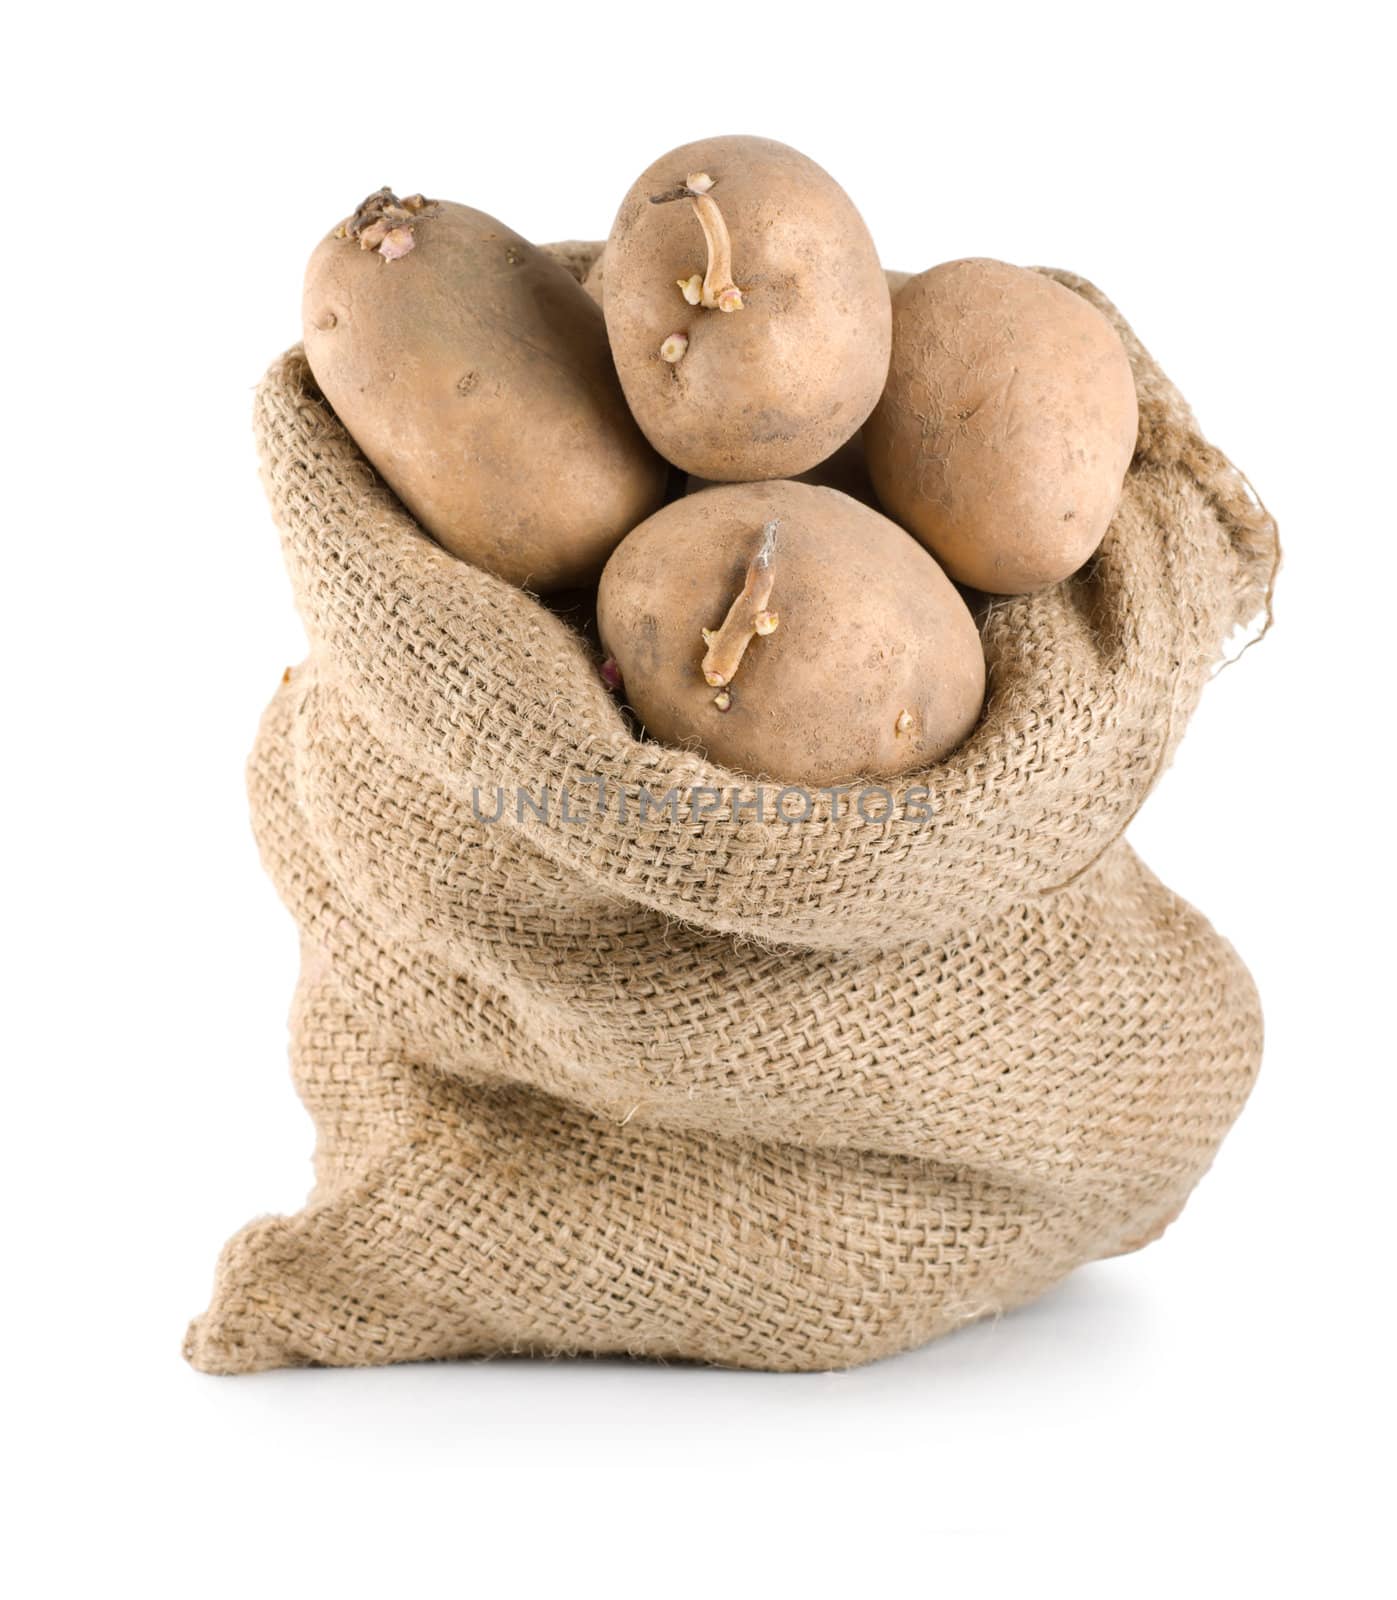 Potatoes in sack by Givaga